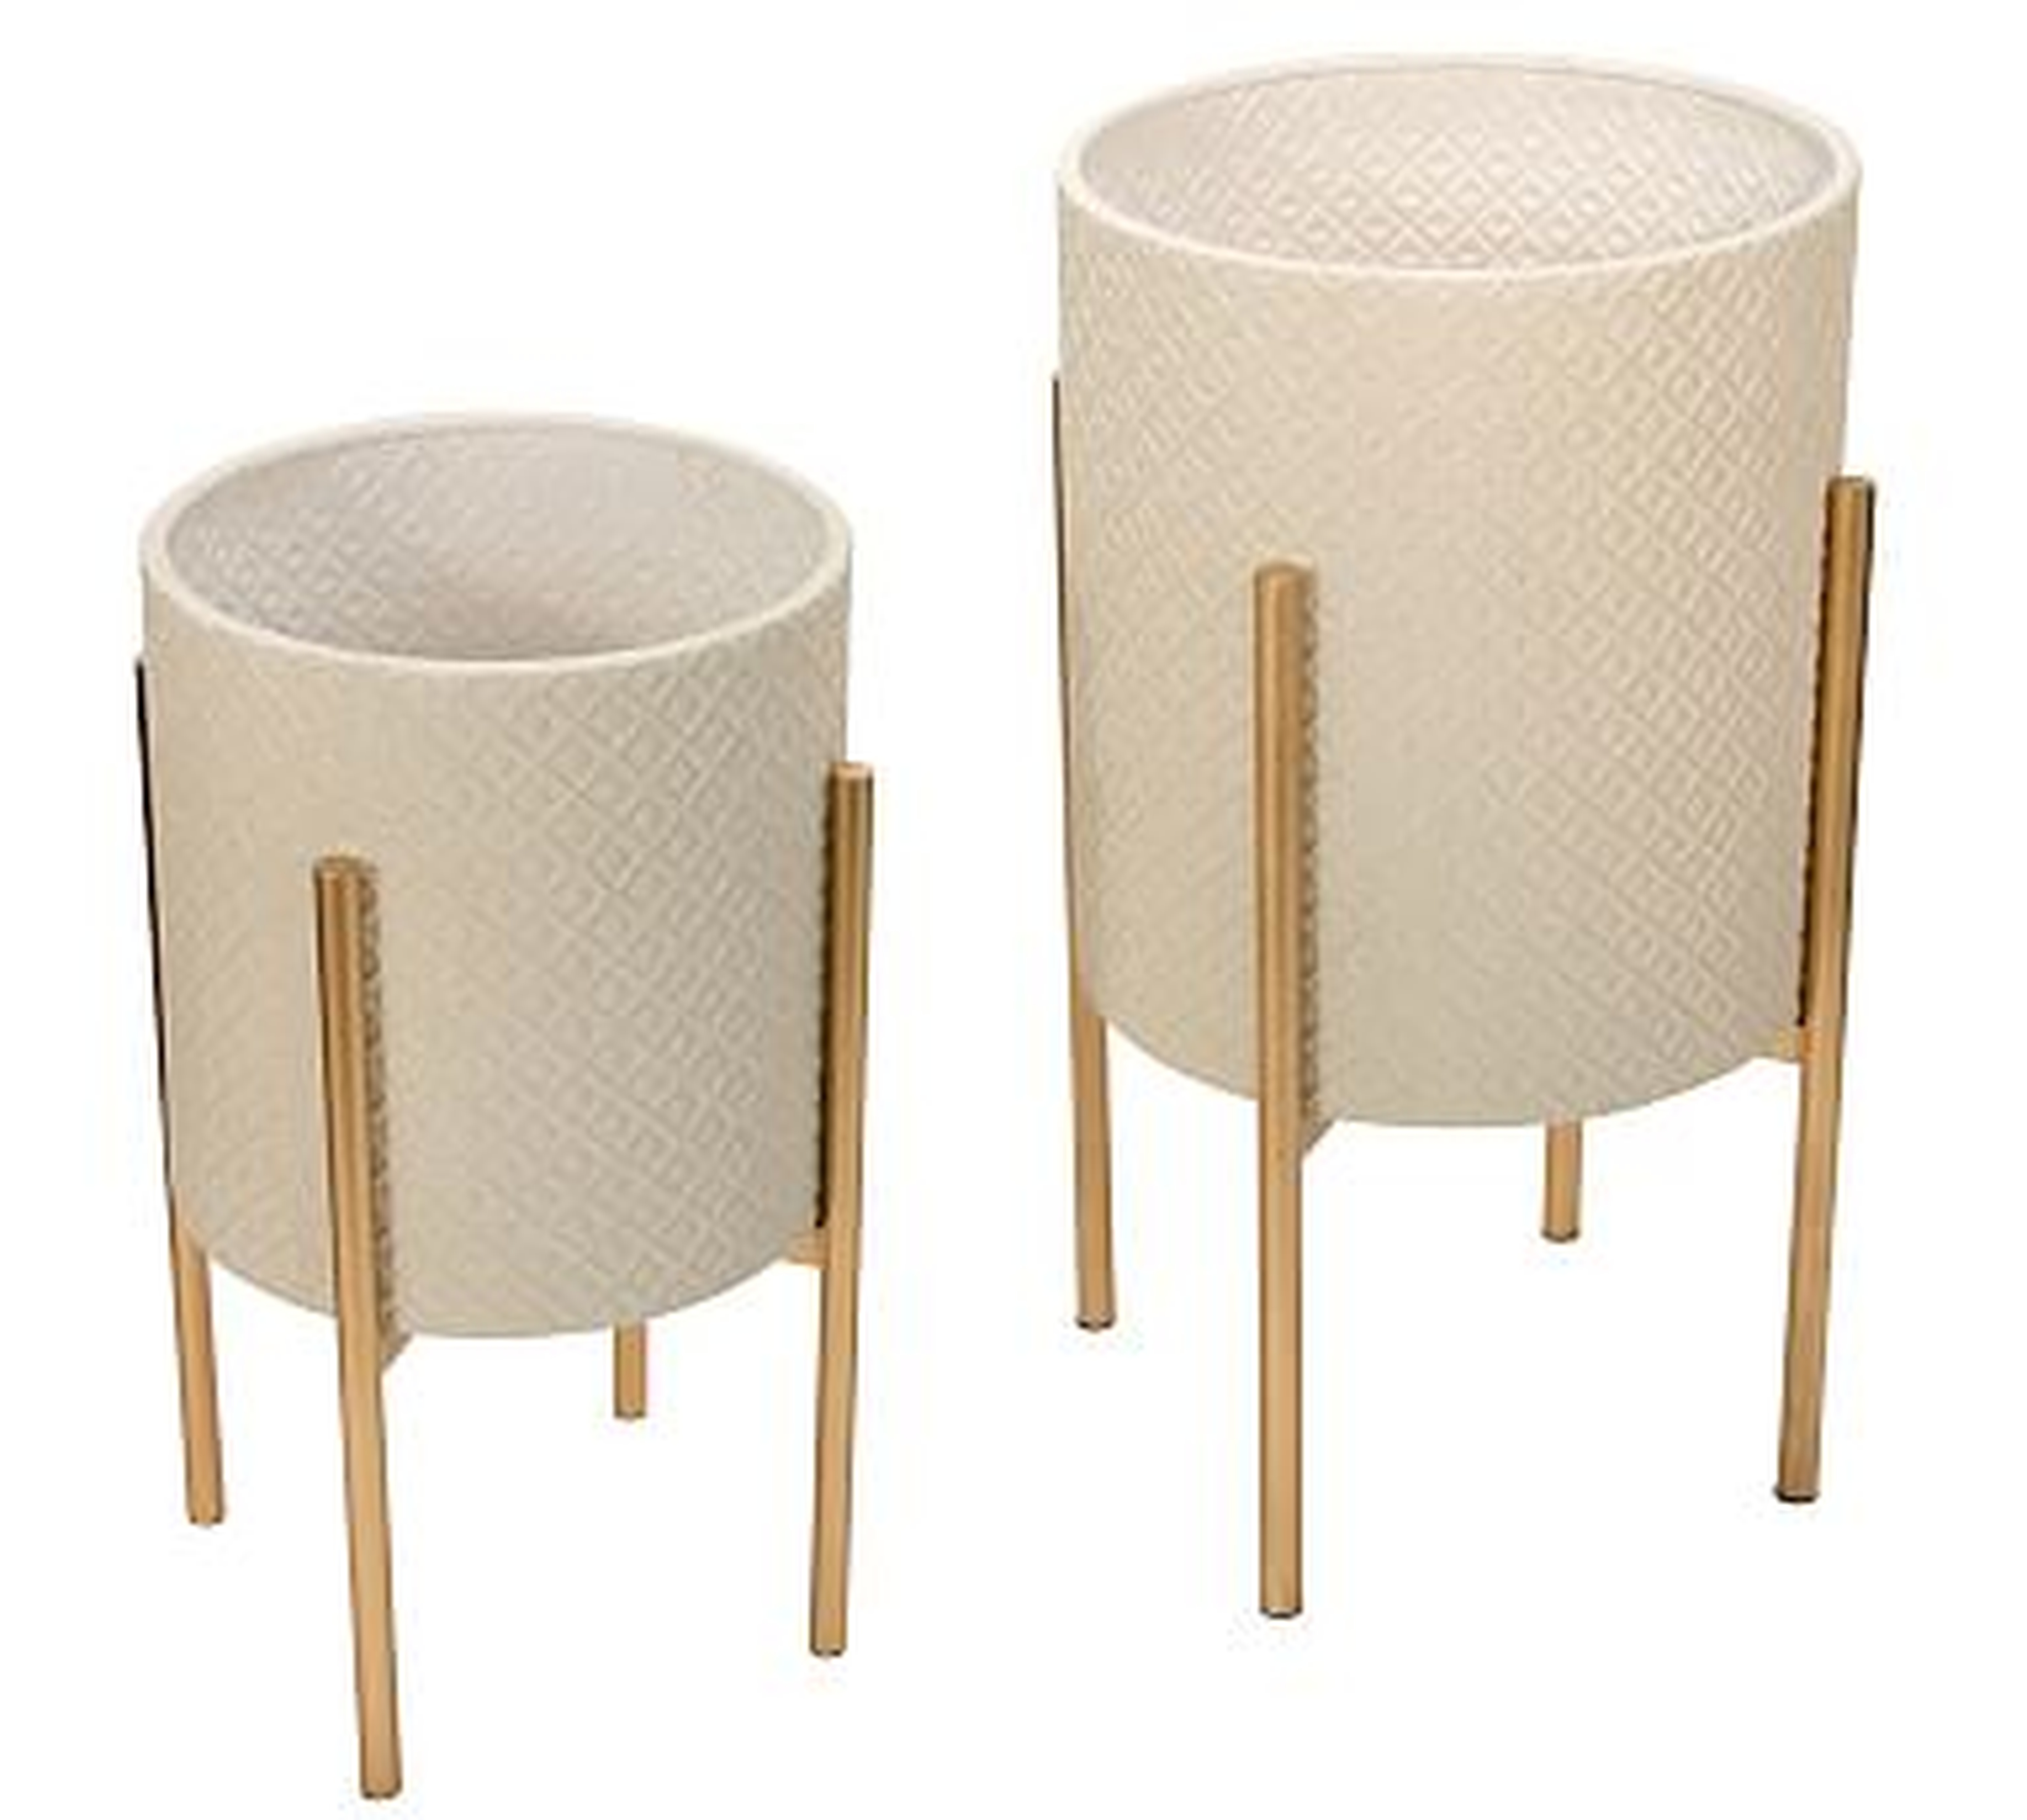 Leah White Patterned Raised Planters with Gold Stand, Set of 2 - Pottery Barn